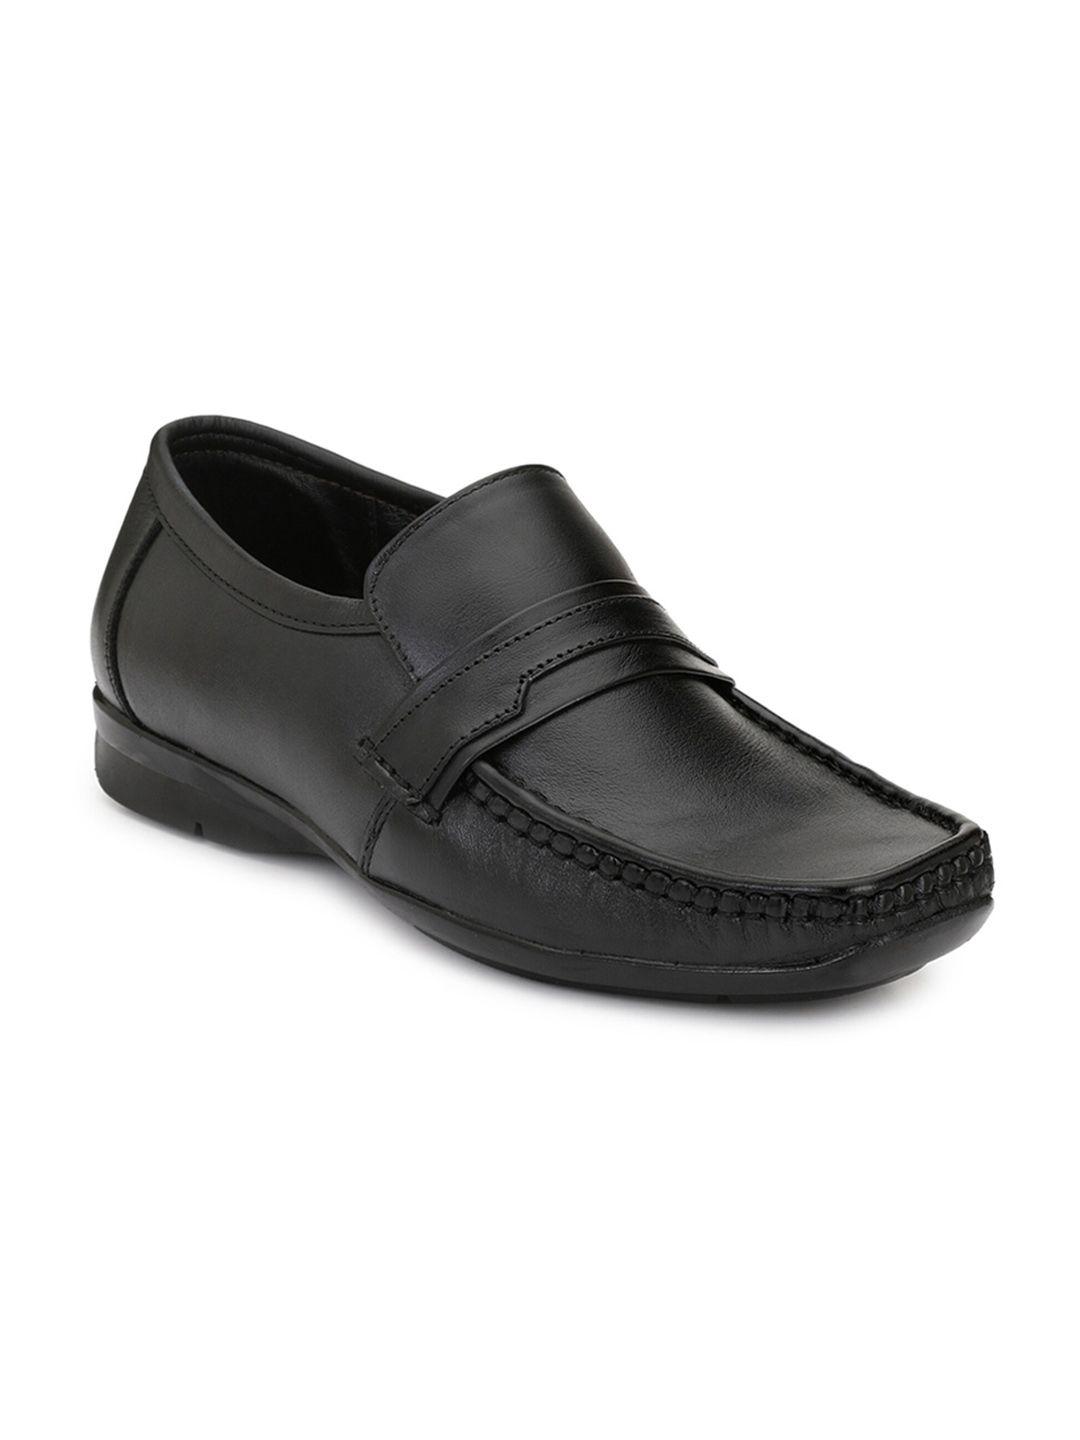 eego italy men genuine leather formal loafer shoes